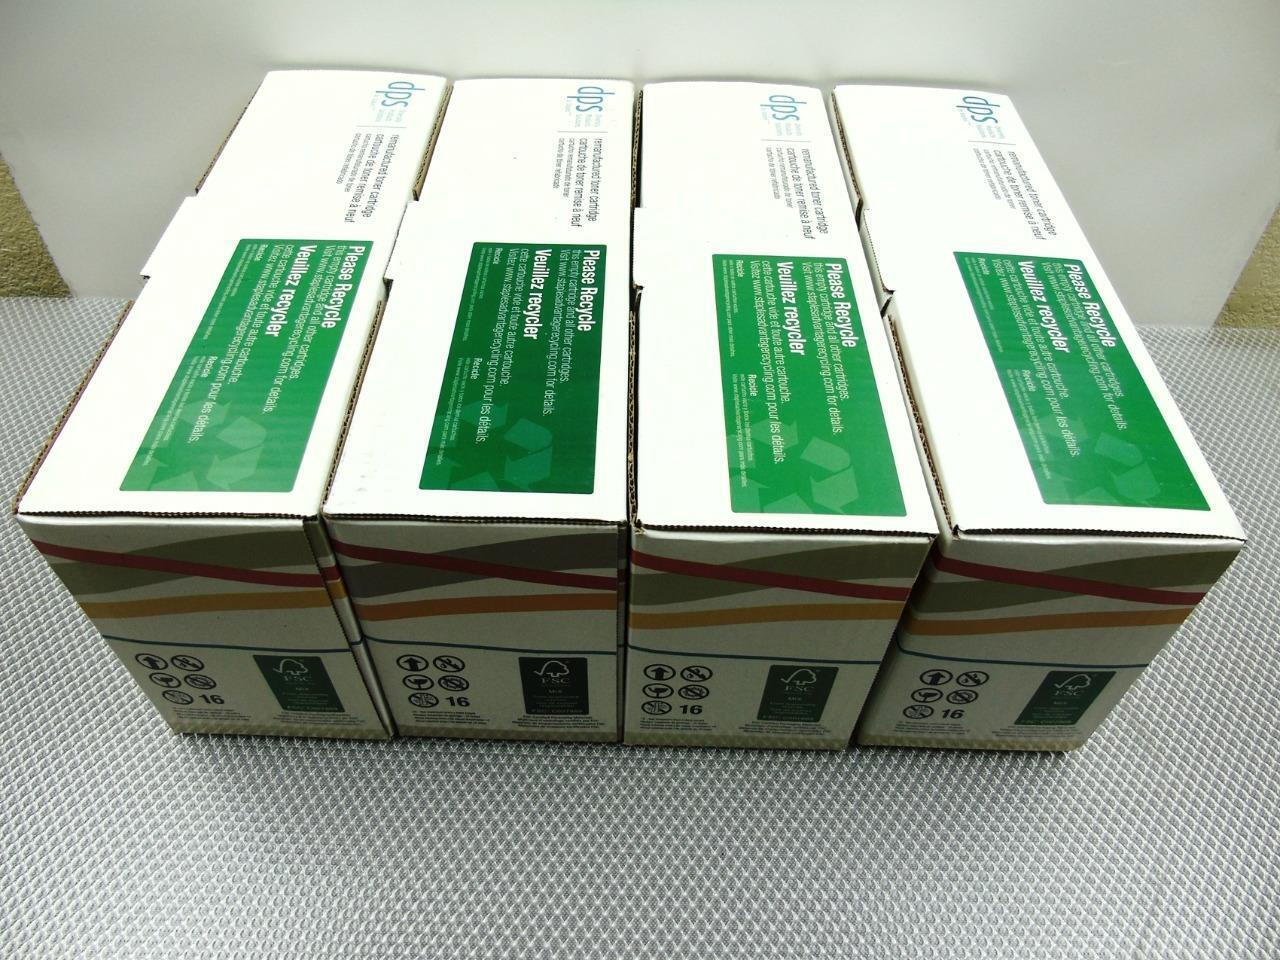 Lot of 4 - New Sealed Staples Sustainable Earth DPS12AR Toner Black Q2612A